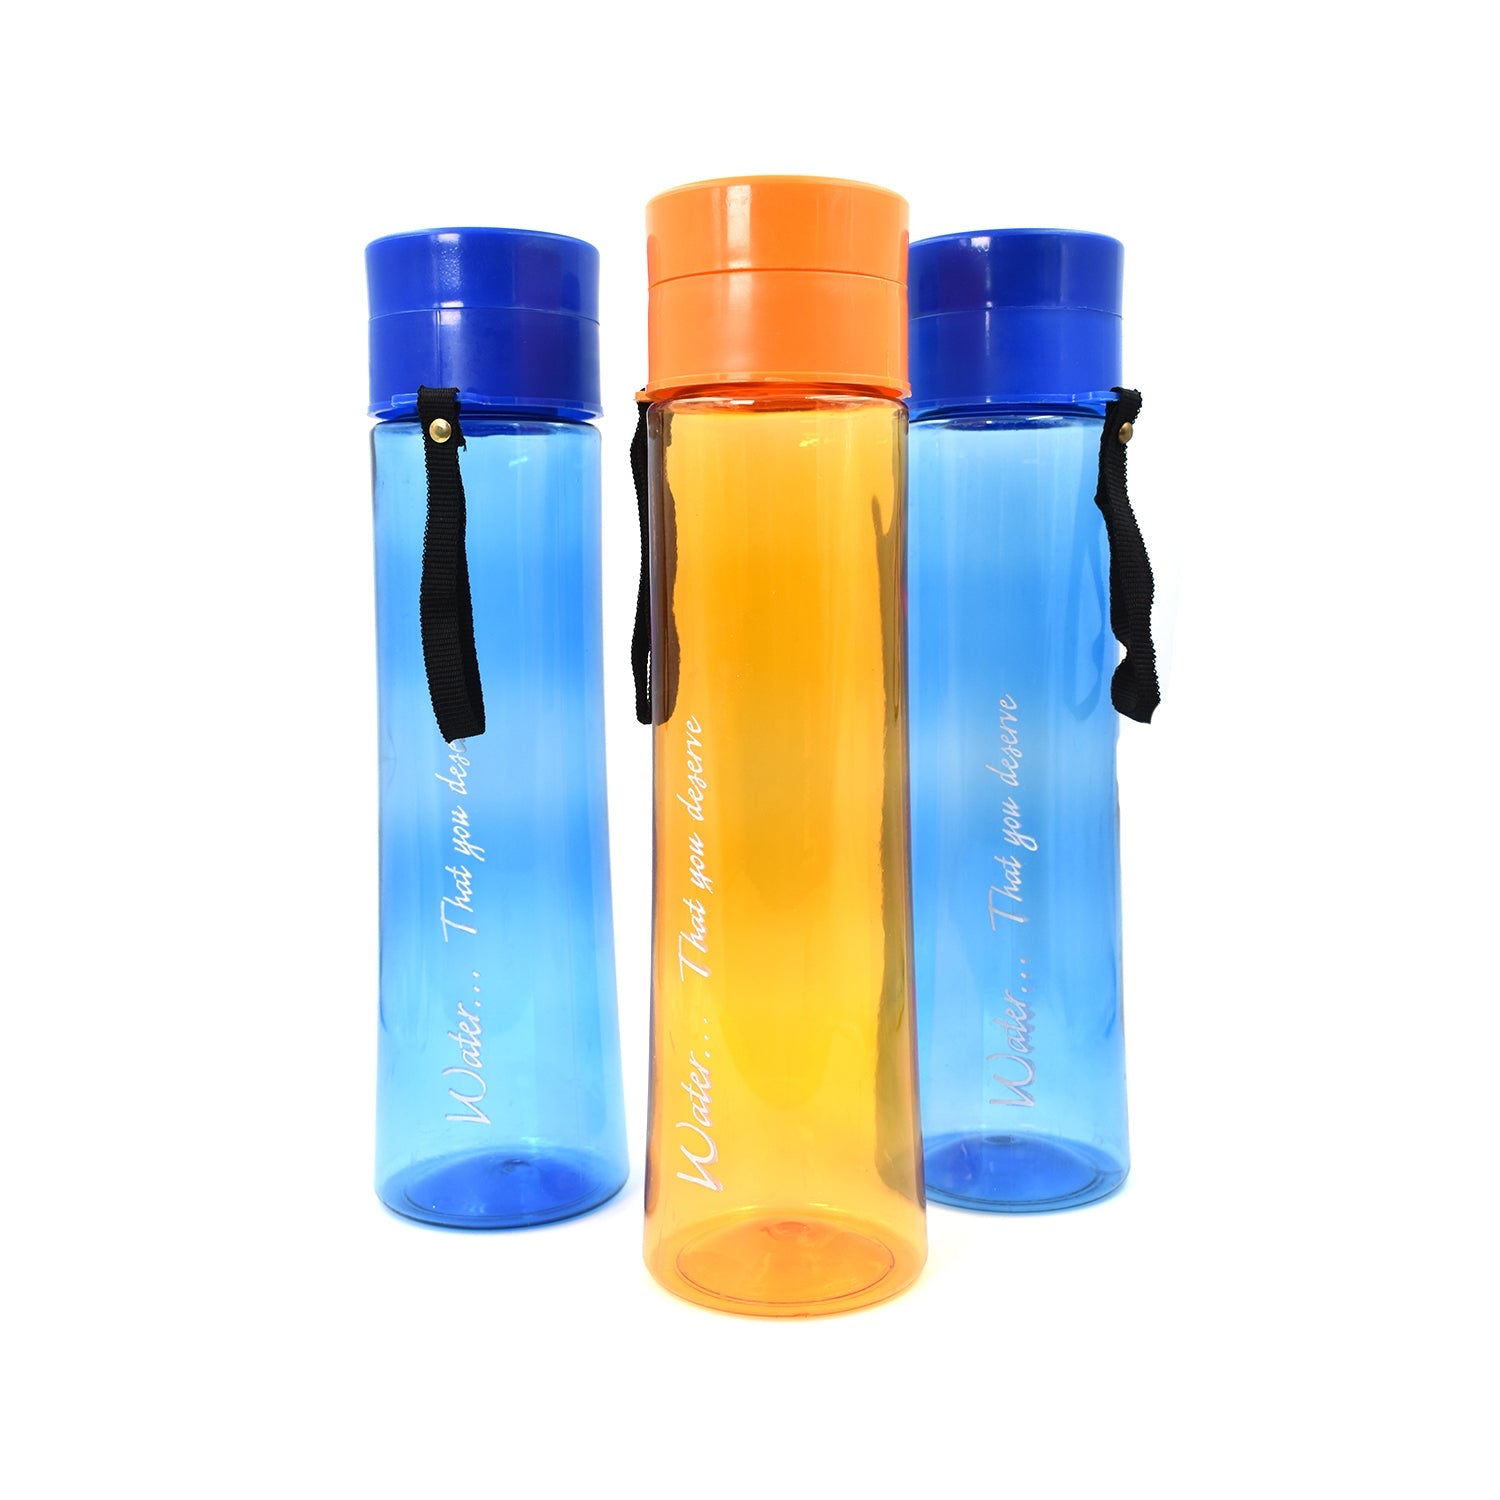 2716 Unbreakable, Leakproof, Durable, BPA Free, Non-Toxic Plastic Water Bottles, 1 Litre (Pack of 3, Assorted Color) - DeoDap